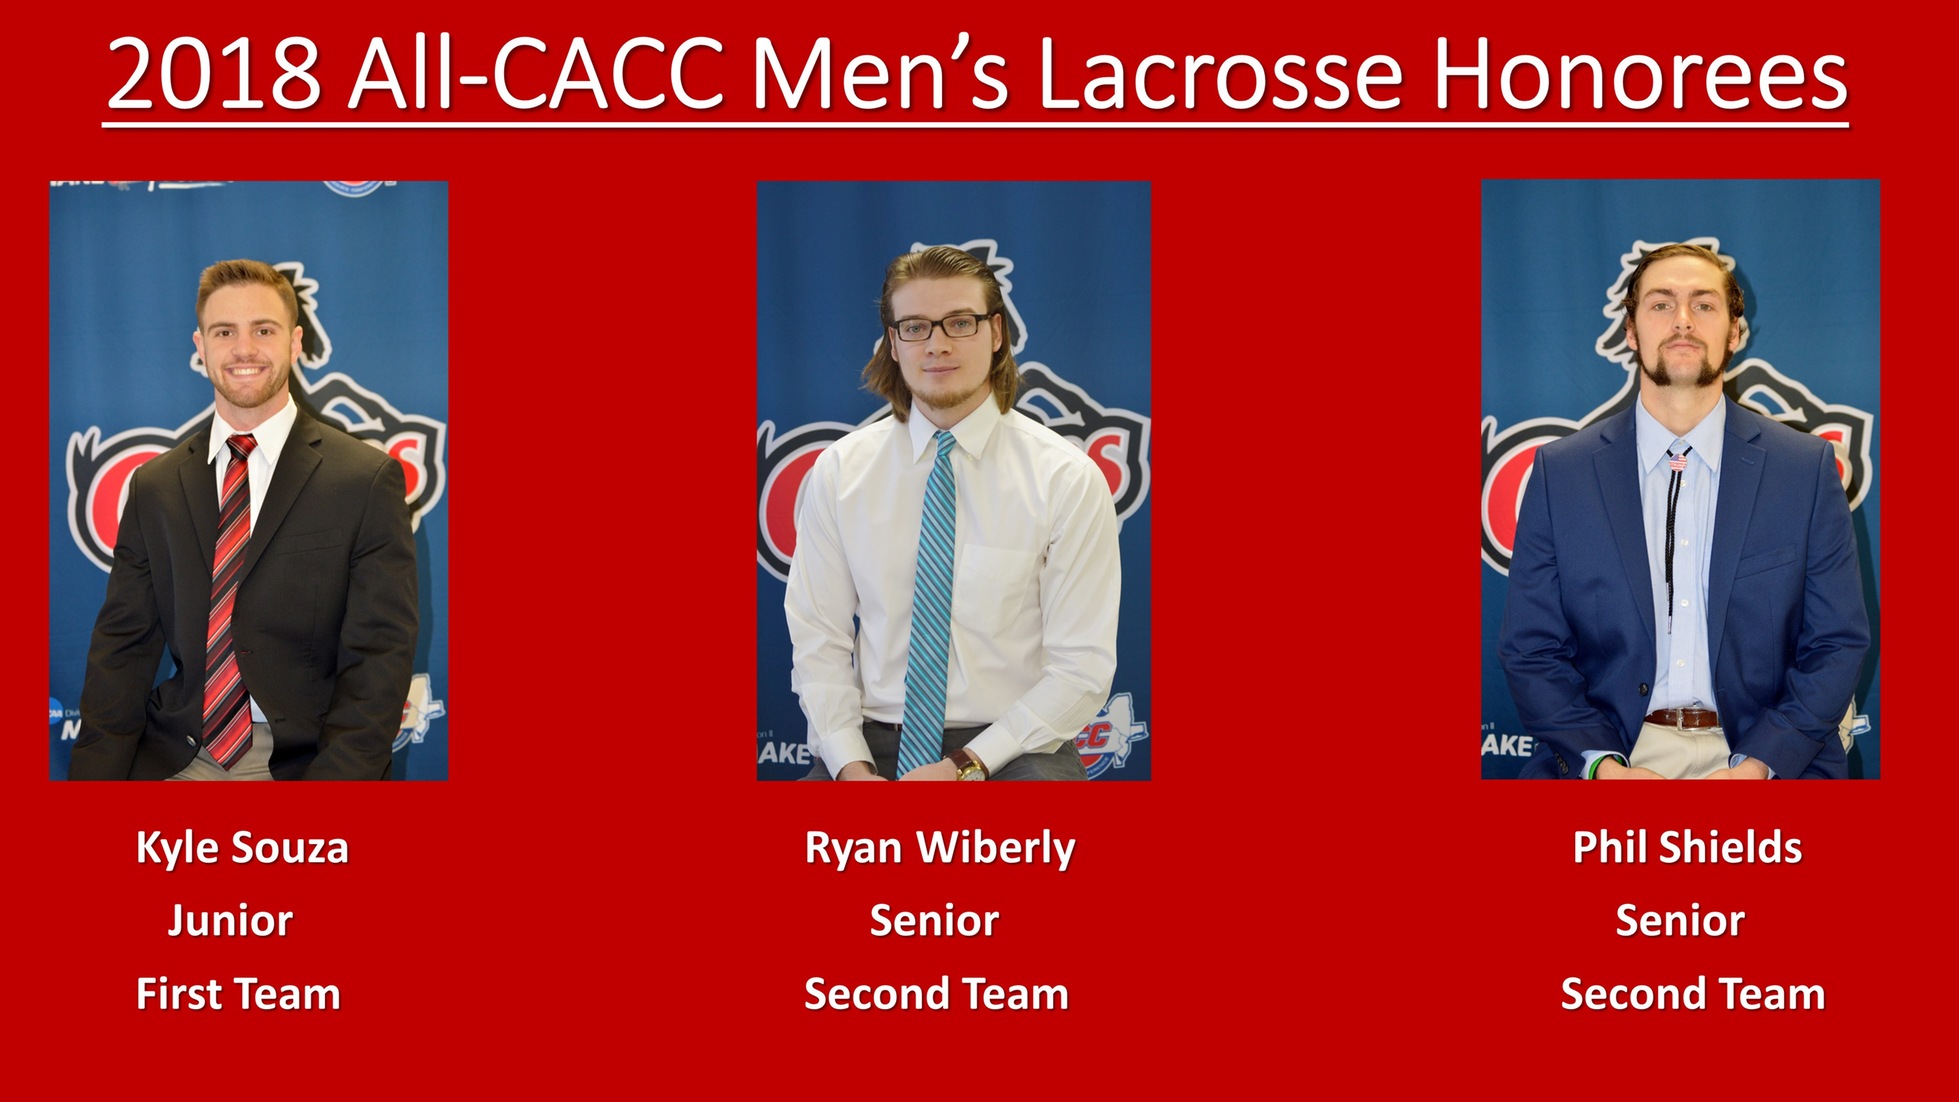 THREE CHARGERS NAMED TO ALL-CACC MEN'S LACROSSE TEAMS